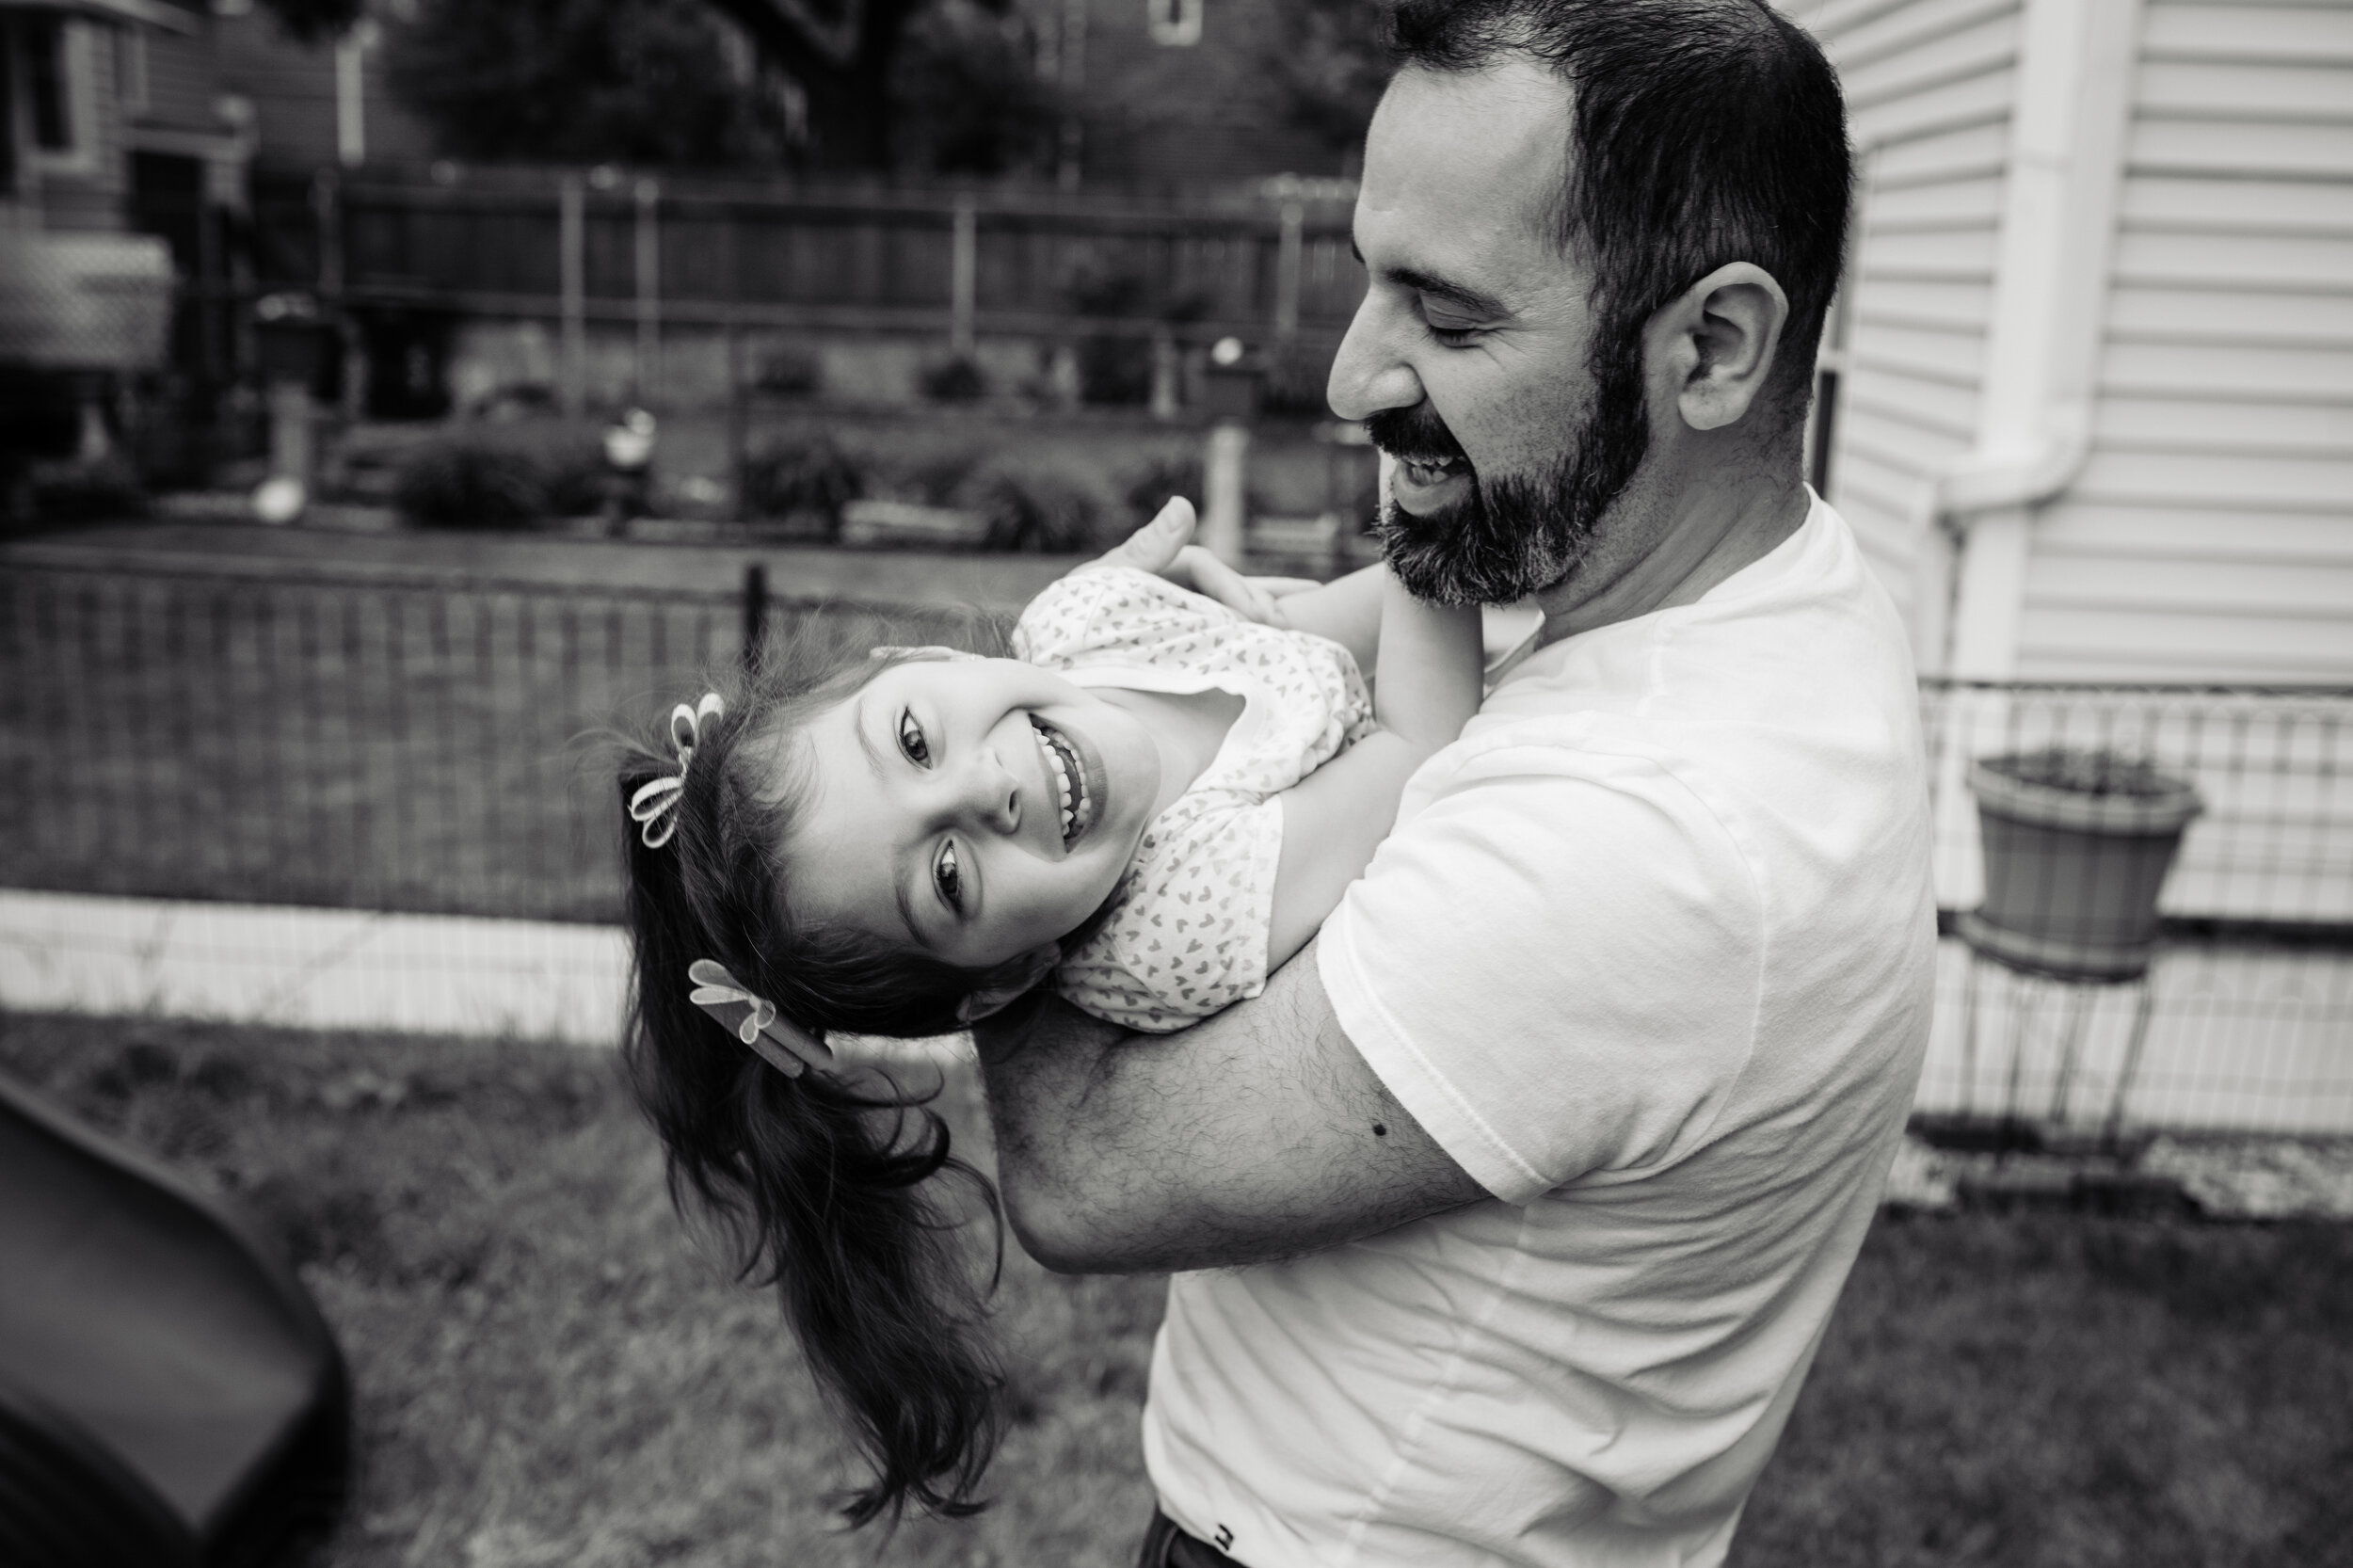 Fun candid photo of father and daughter: family portrait session photographed by J. Brown Photography.